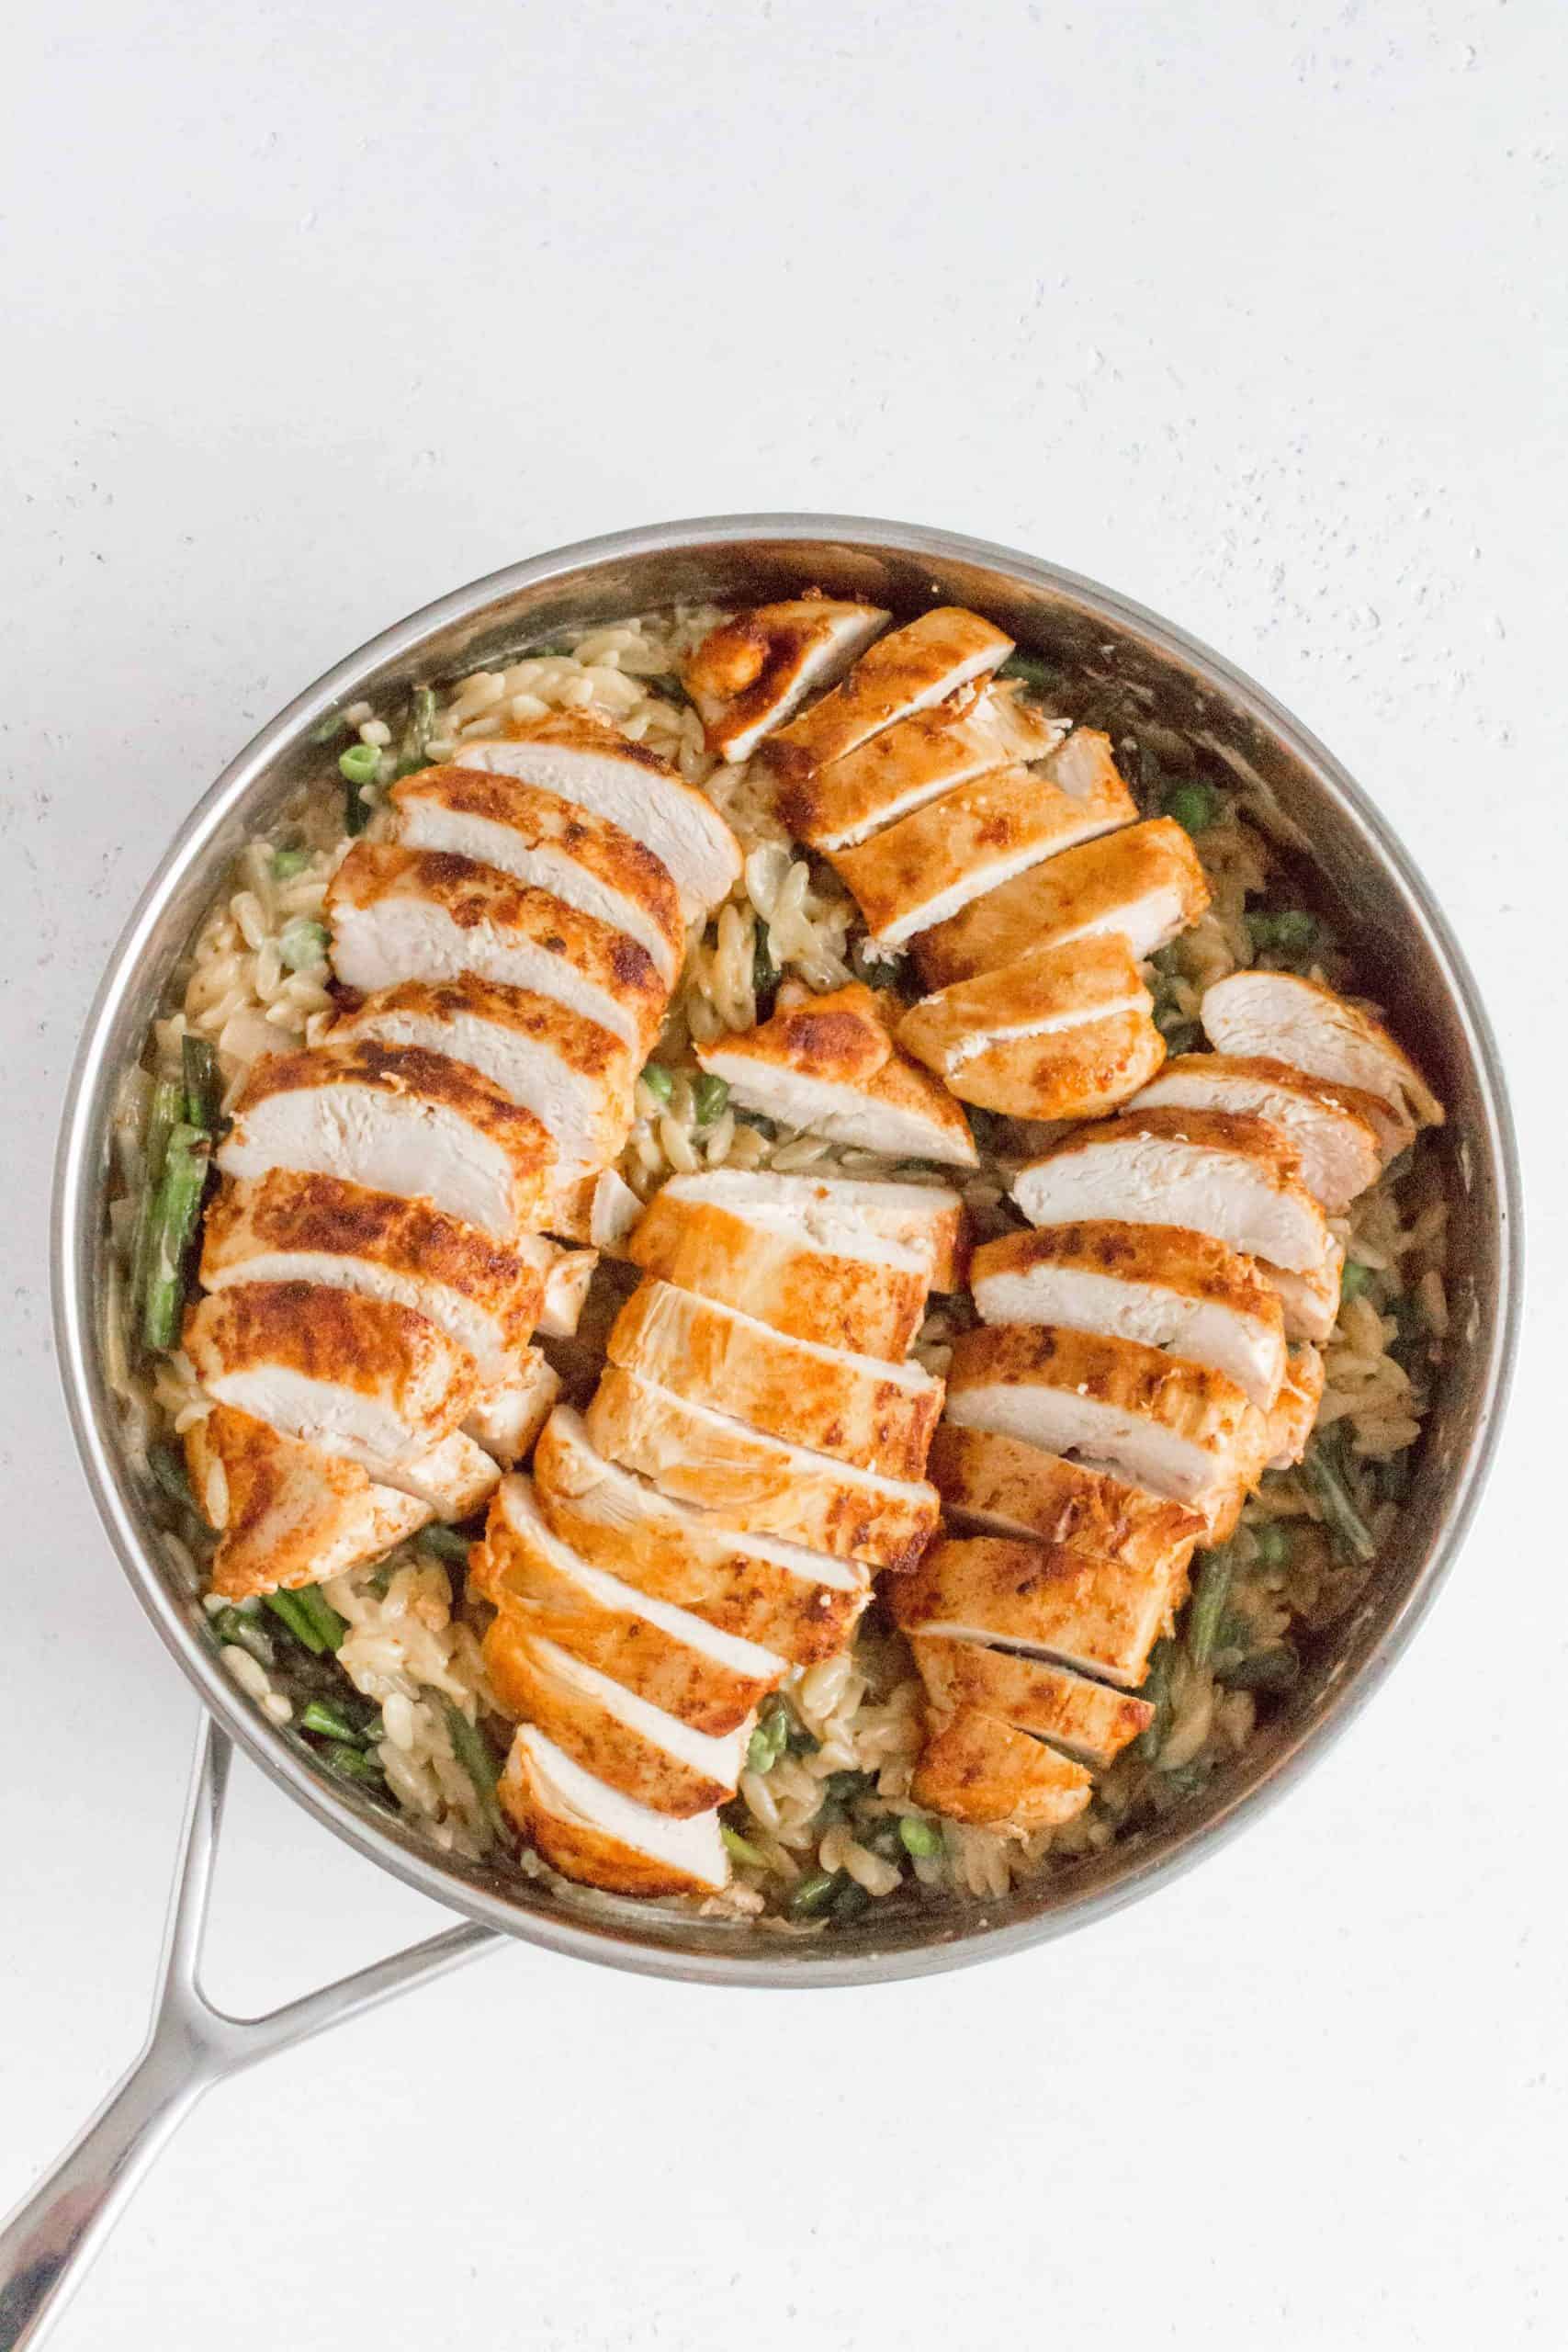 This One Pot Creamy Orzo and Chicken makes for the perfect weeknight dinner. Cooked in one pan, the layer of flavours makes this dish plate-licking good!